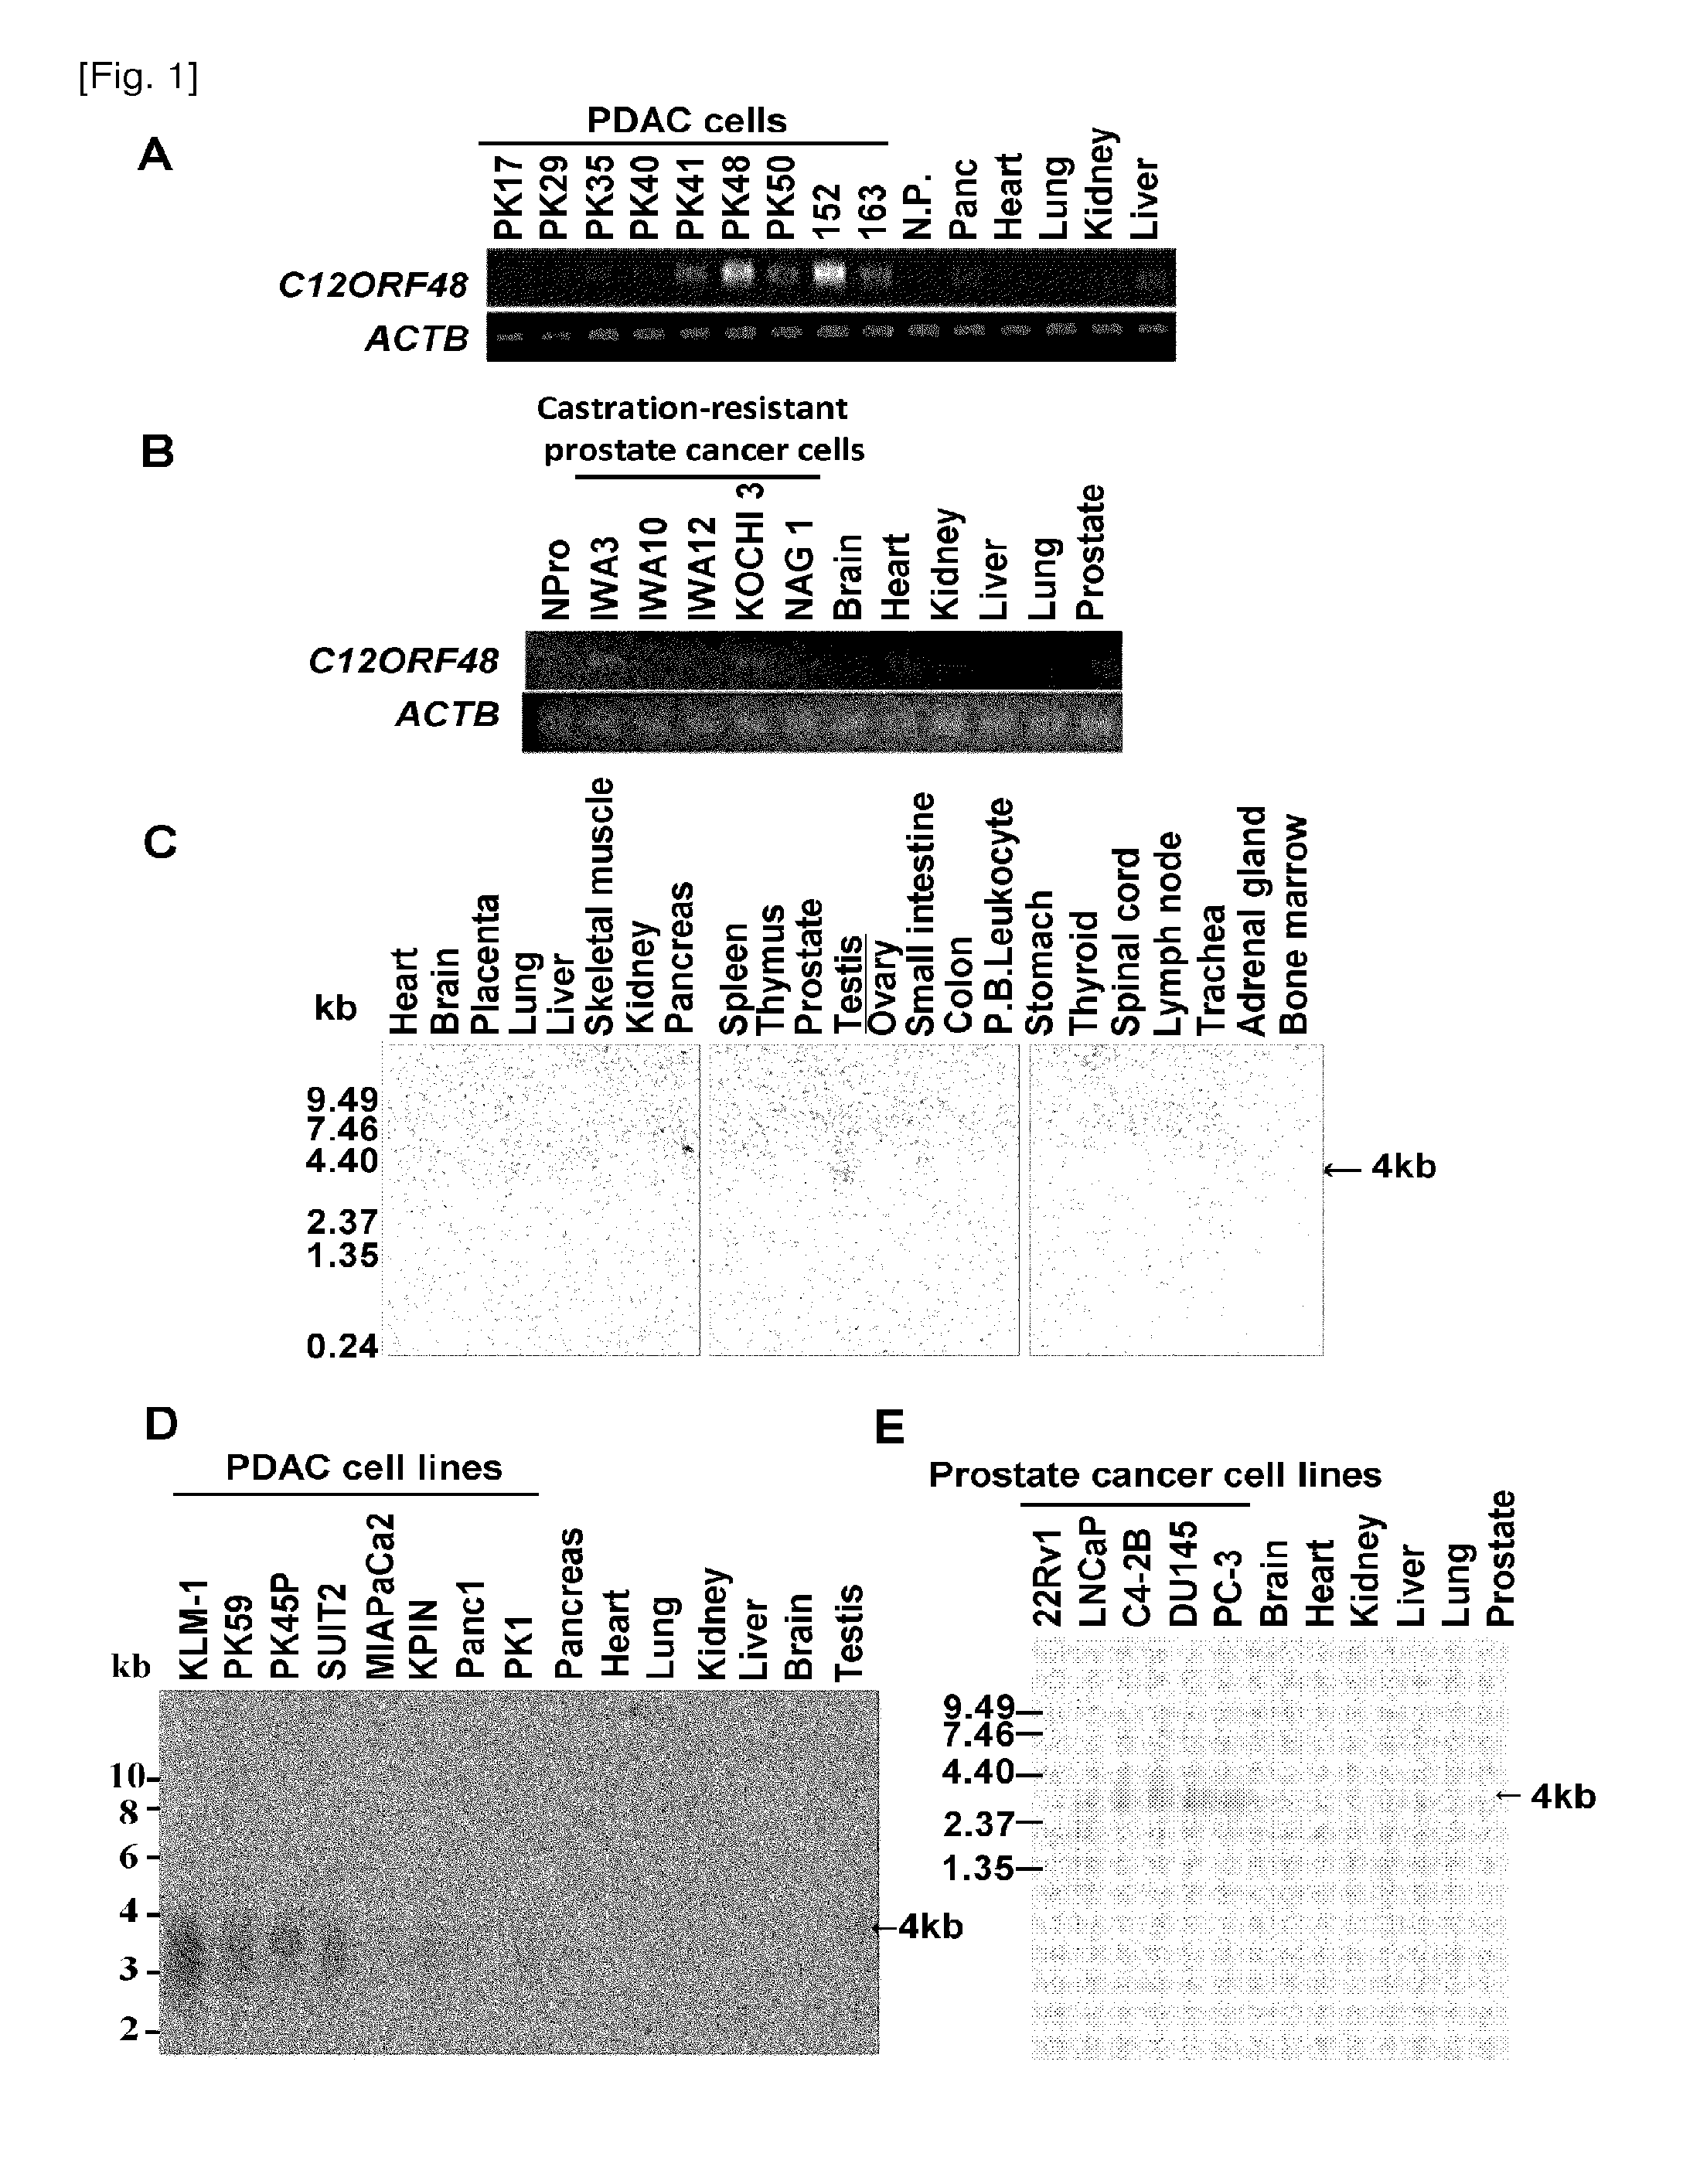 C12orf48 as a target gene for cancer therapy and diagnosis